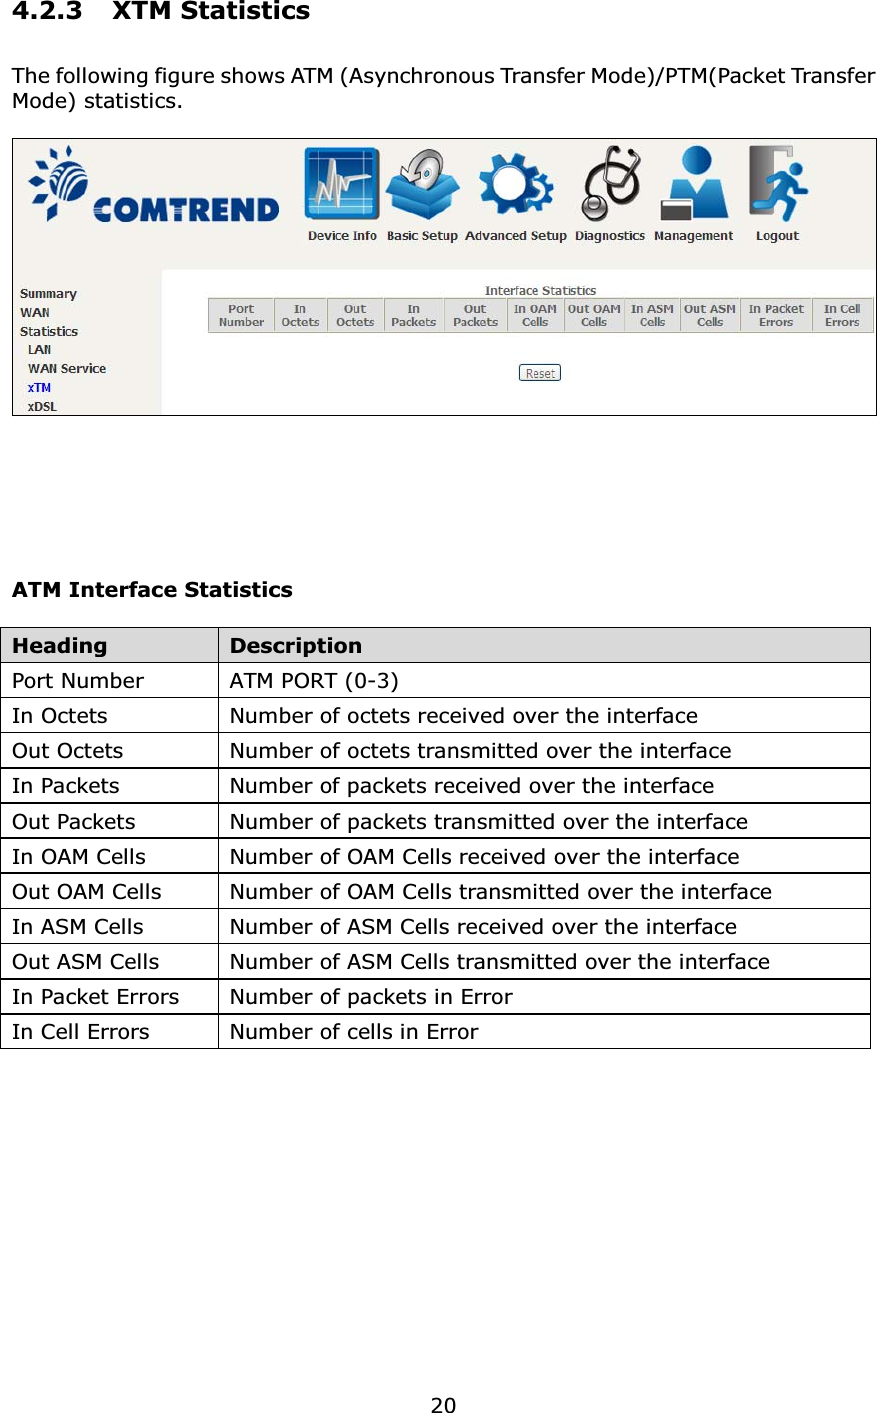 204.2.3 XTM StatisticsThe following figure shows ATM (Asynchronous Transfer Mode)/PTM(Packet Transfer Mode) statistics.ATM Interface StatisticsHeadingDescriptionPort Number ATM PORT (0-3)In Octets Number of octets received over the interfaceOut Octets Number of octets transmitted over the interfaceIn Packets Number of packets received over the interfaceOut Packets Number of packets transmitted over the interfaceIn OAM Cells Number of OAM Cells received over the interfaceOut OAM Cells Number of OAM Cells transmitted over the interfaceIn ASM Cells Number of ASM Cells received over the interfaceOut ASM Cells Number of ASM Cells transmitted over the interfaceIn Packet Errors Number of packets in ErrorIn Cell Errors Number of cells in Error